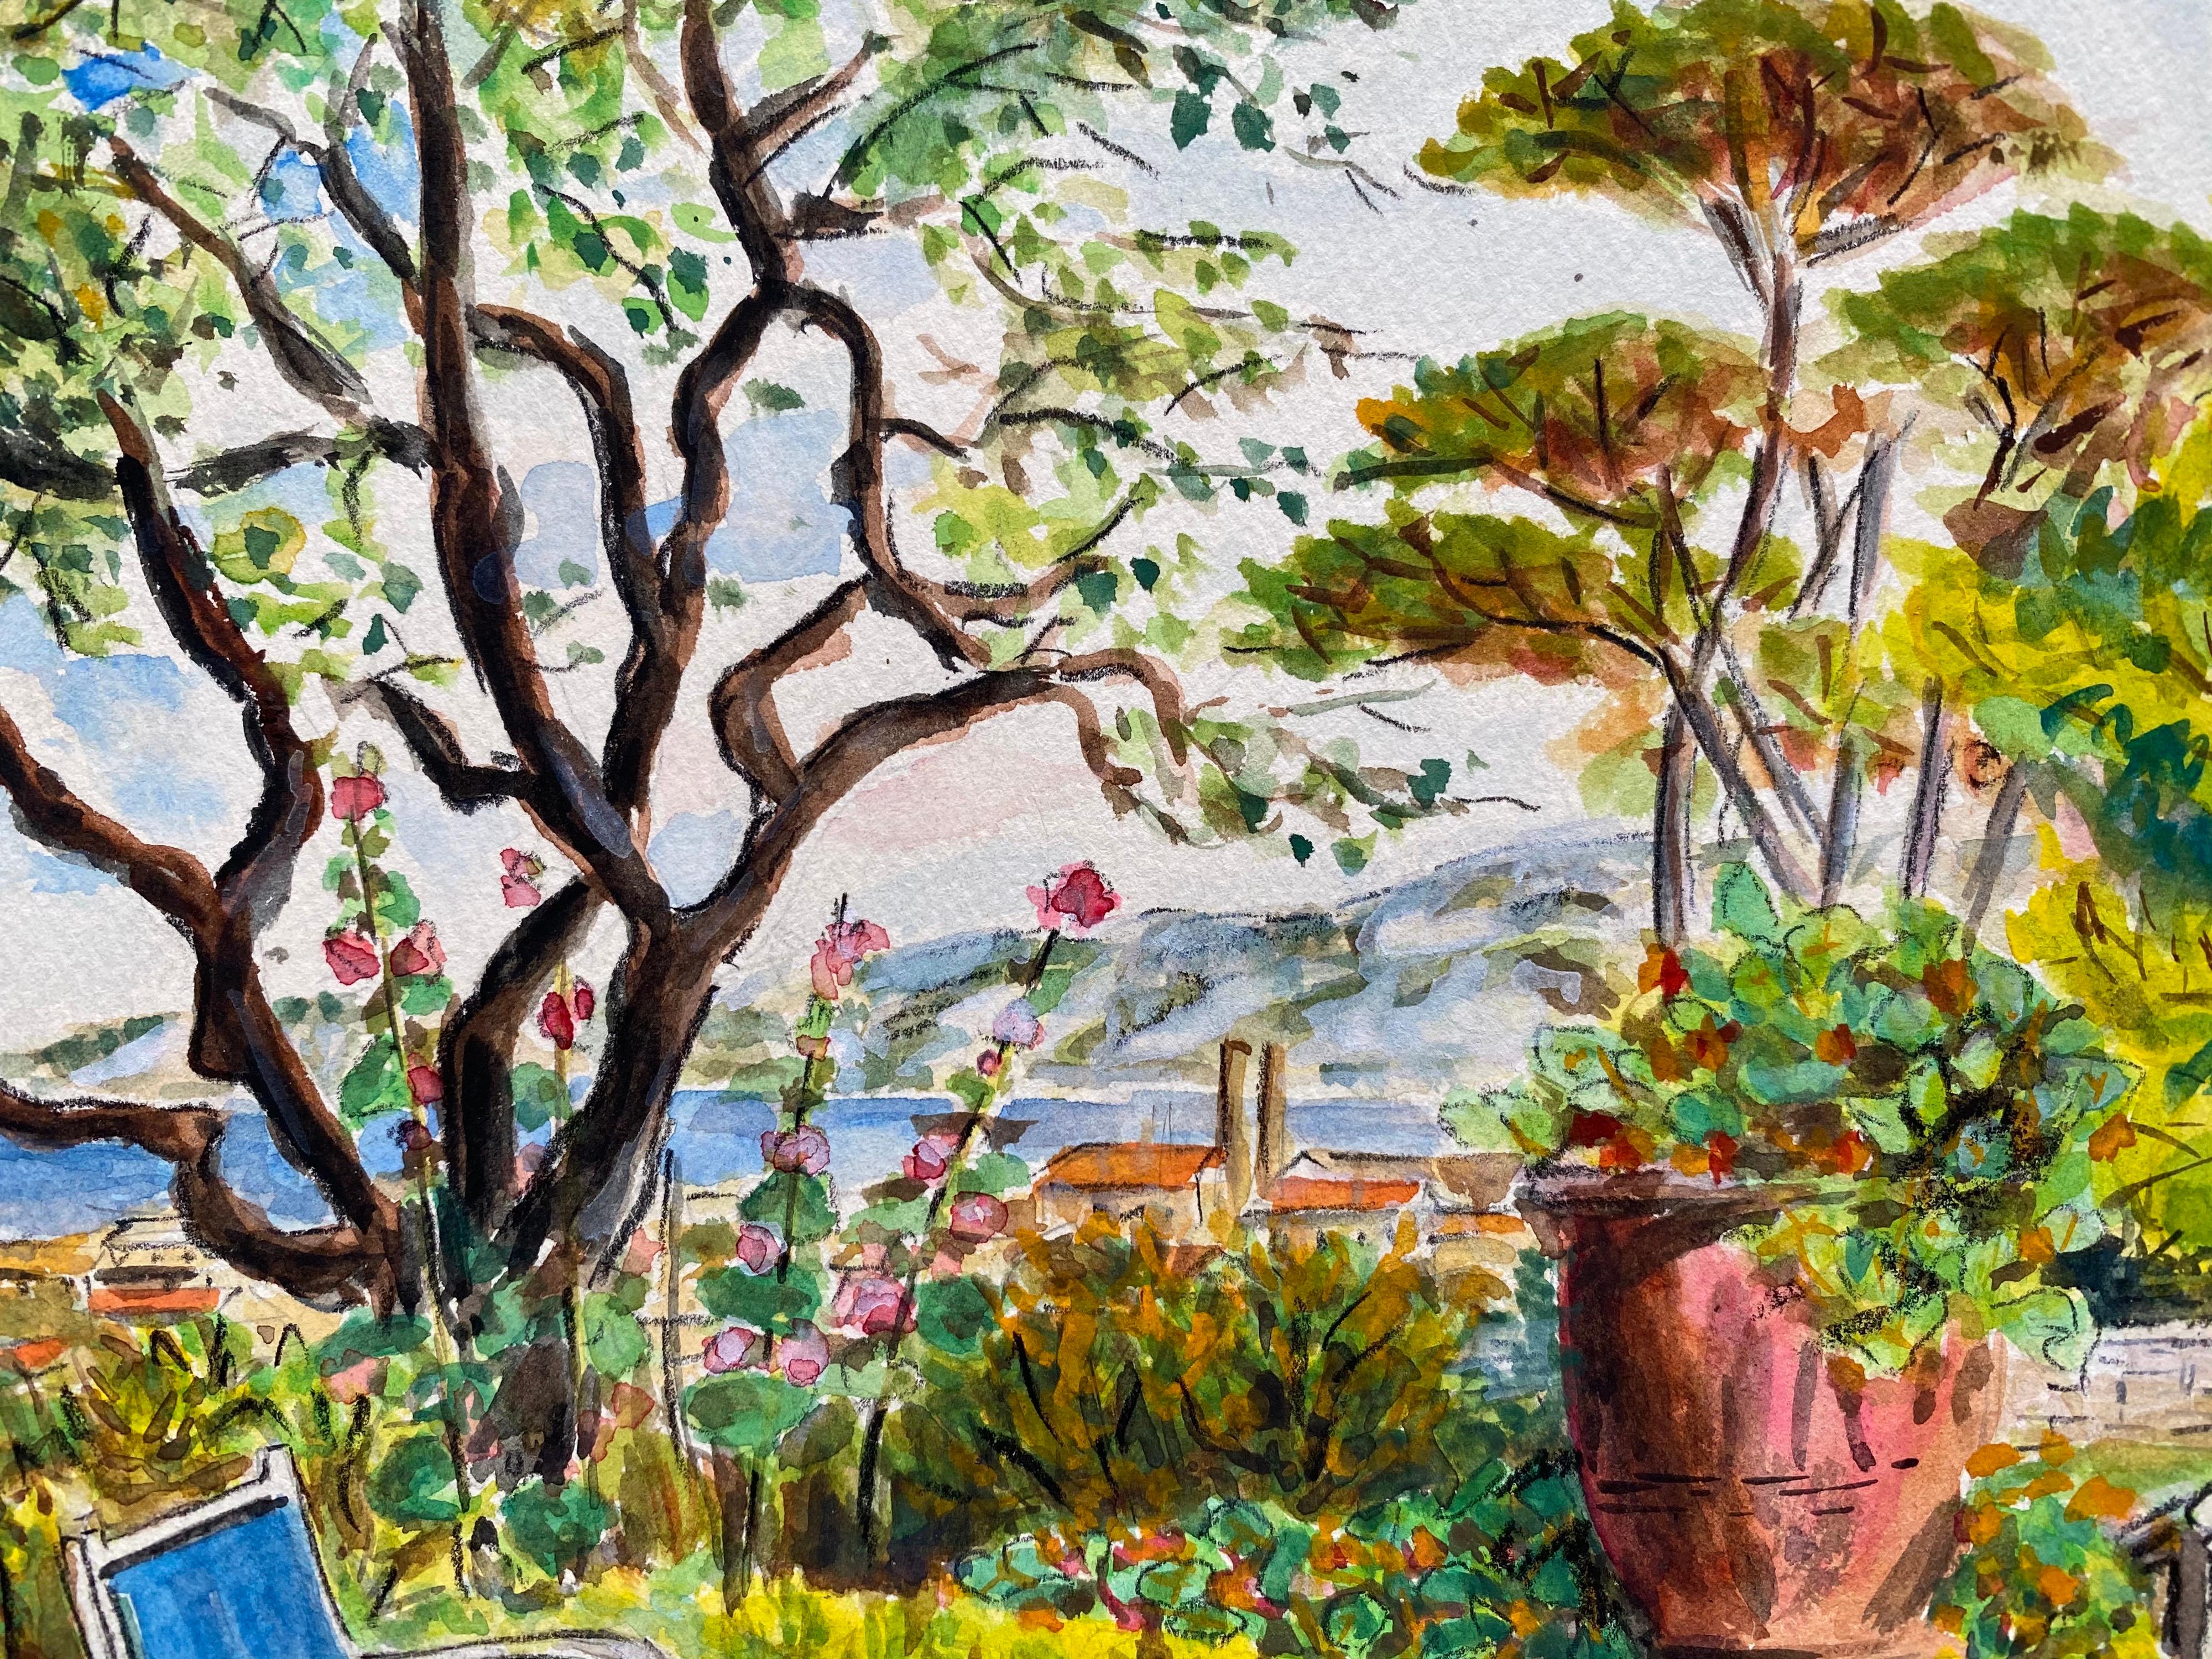 
Artist/ School: French School, mid 20th century

Title: Dans la Jardin, French summer garden scene overlooking the Cote d'Azur coastline. 

Medium: watercolour on artists paper

Size: painting: 8.25 x 10.5 inches
        
Provenance: private